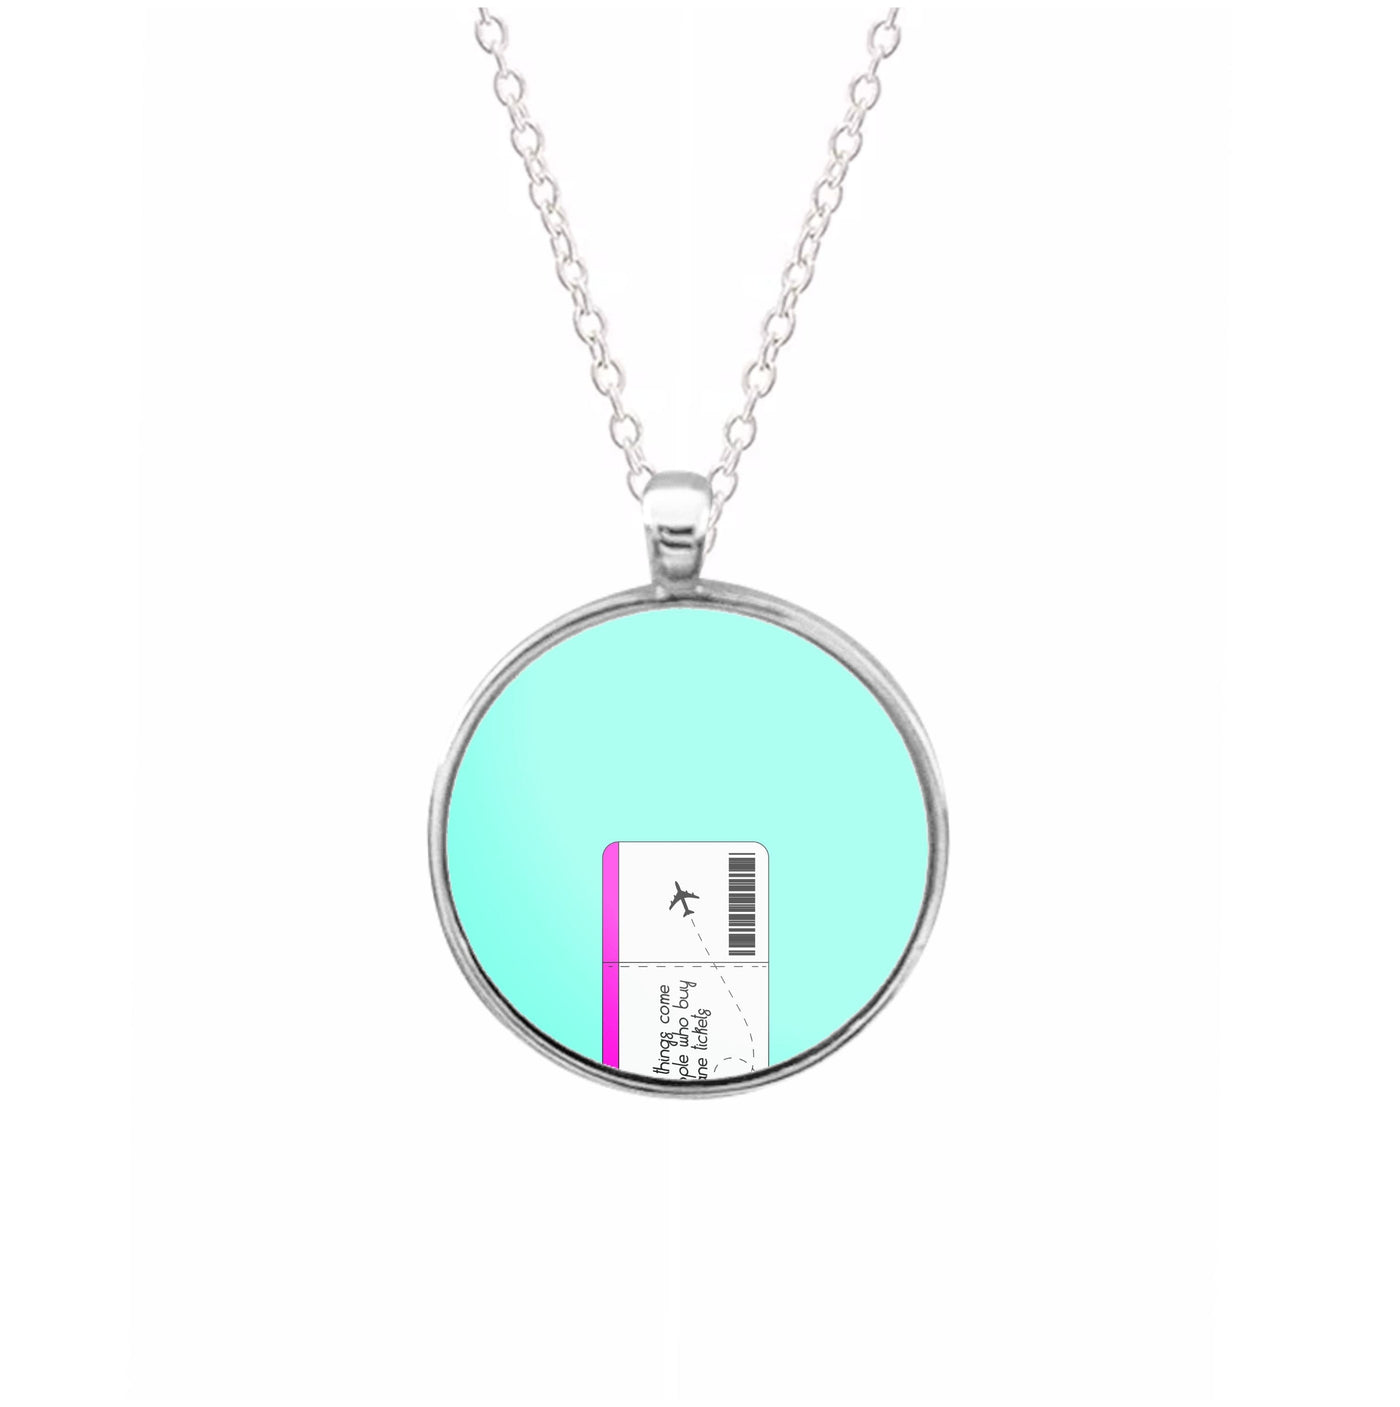 Buy Plane Tickets - Travel Necklace